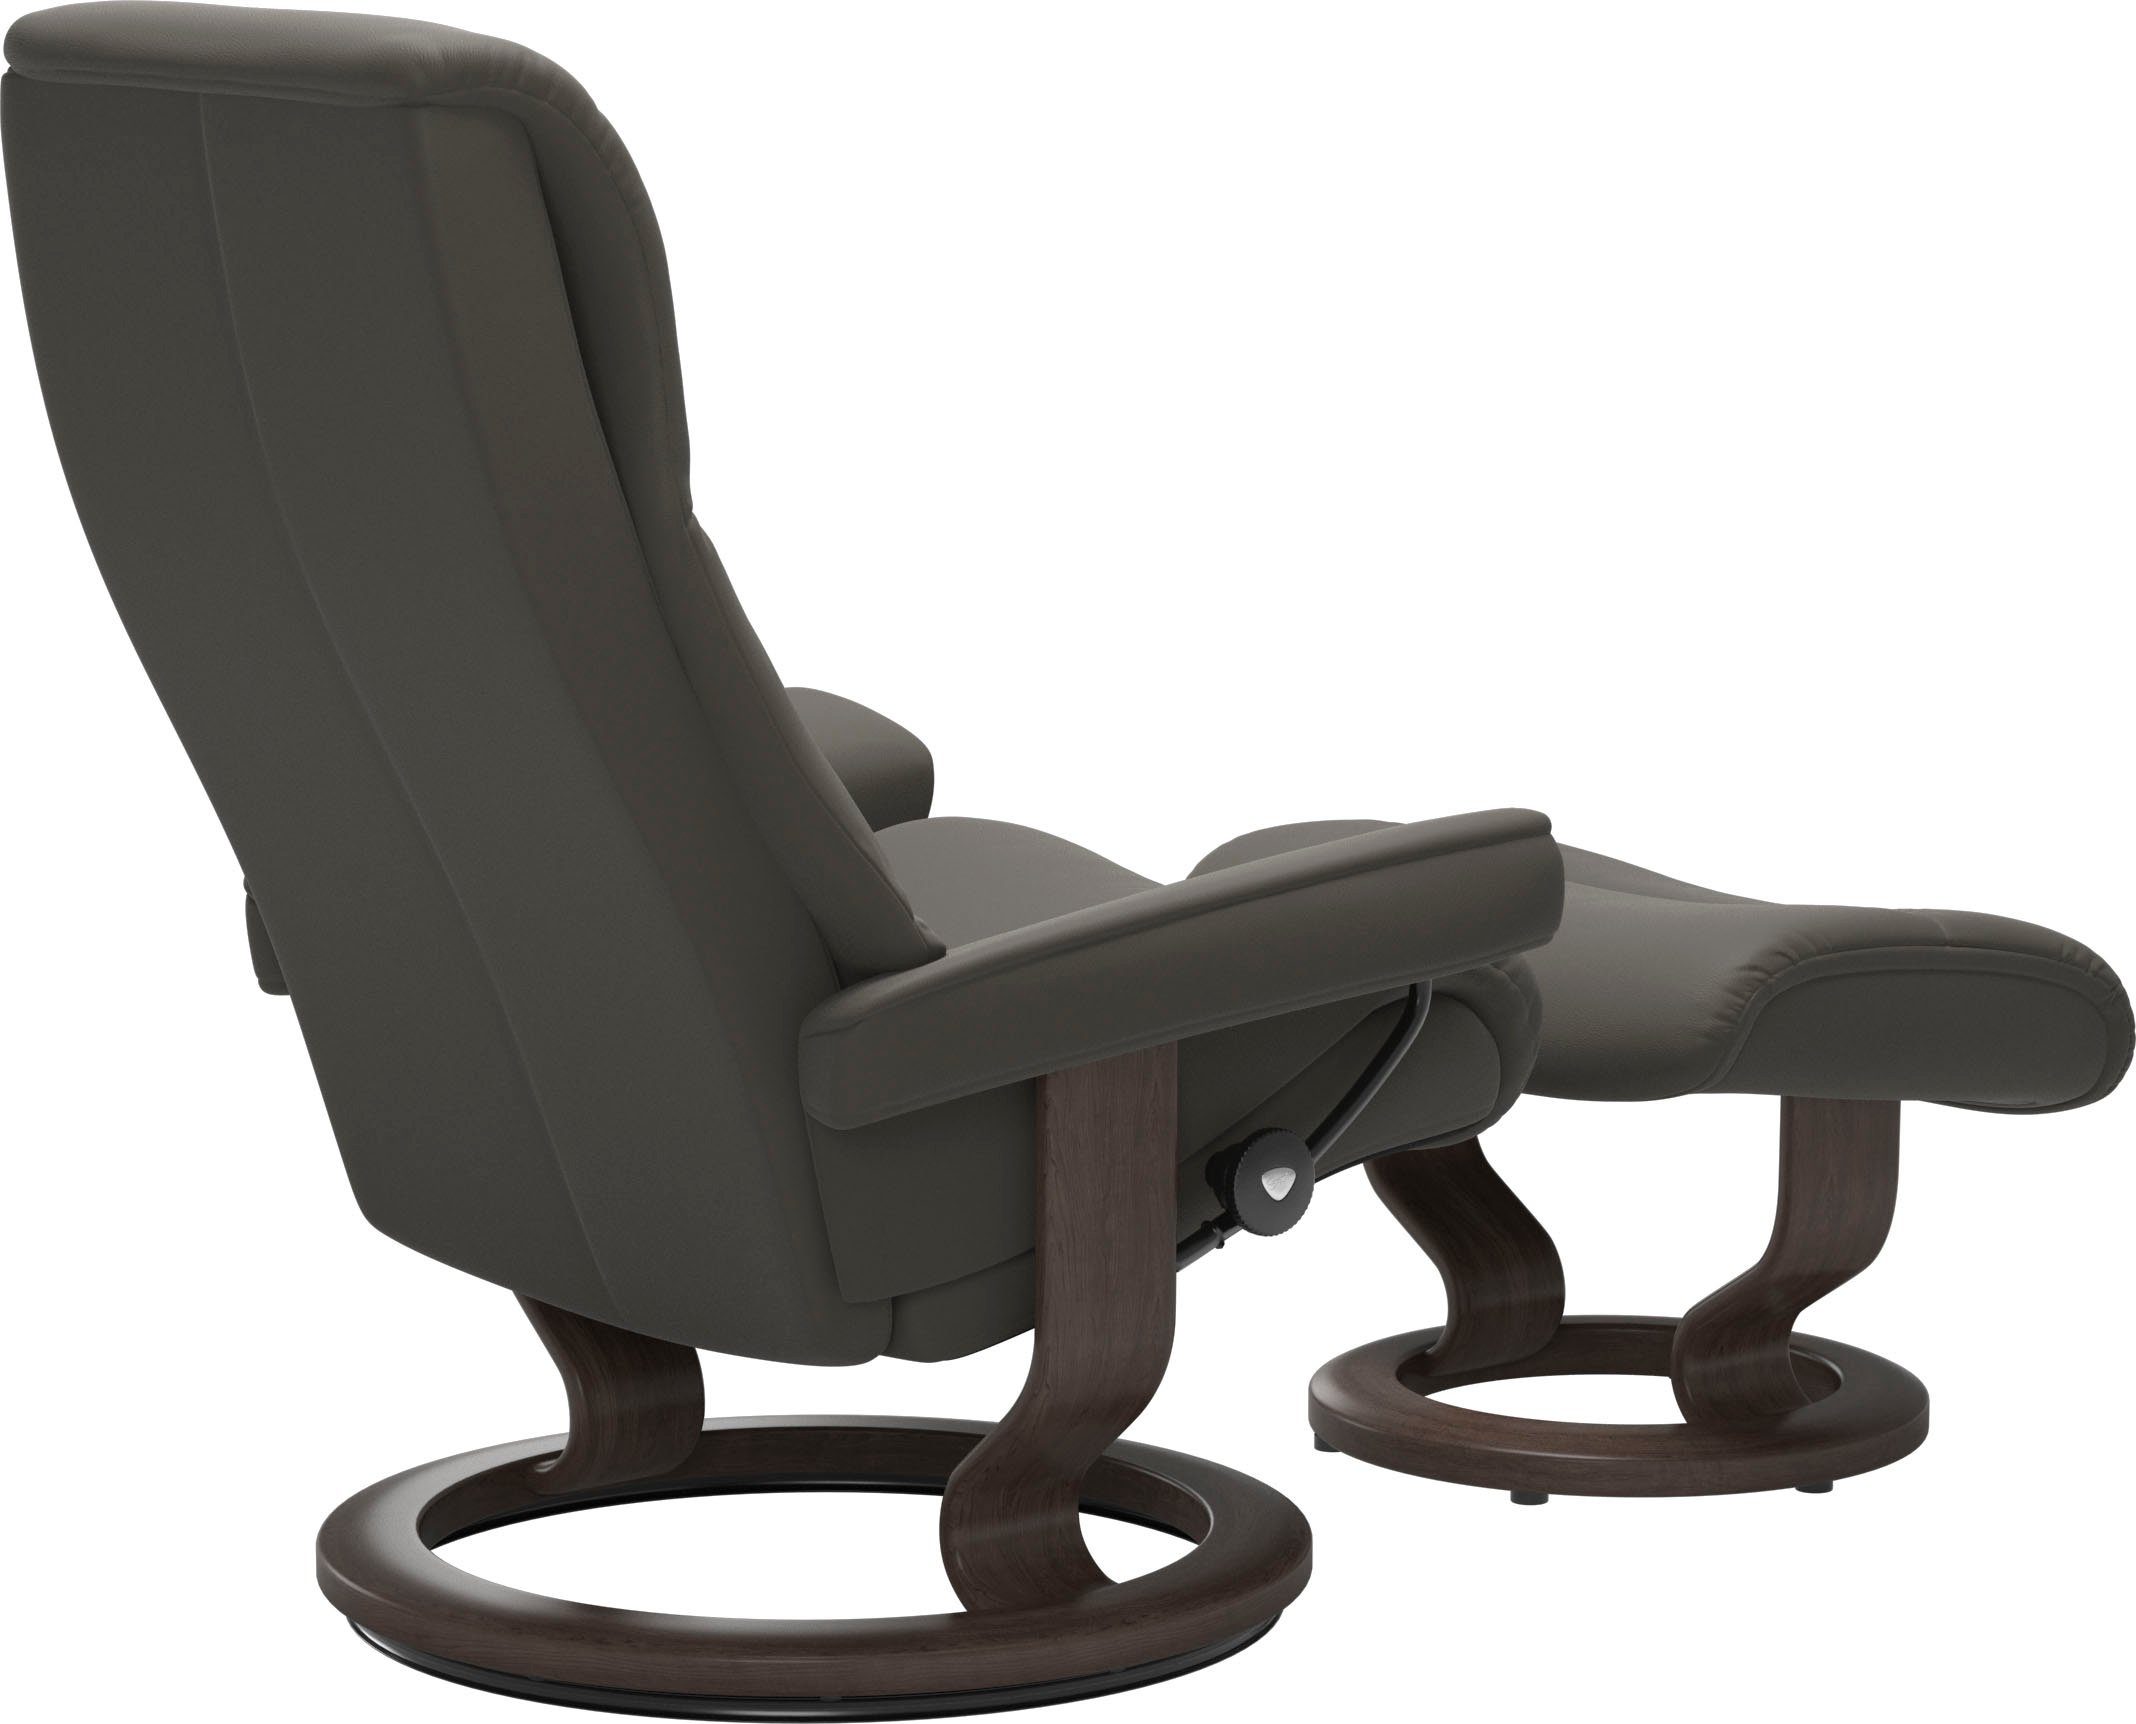 Stressless® Relaxsessel View, Base, Wenge Größe Classic mit S,Gestell